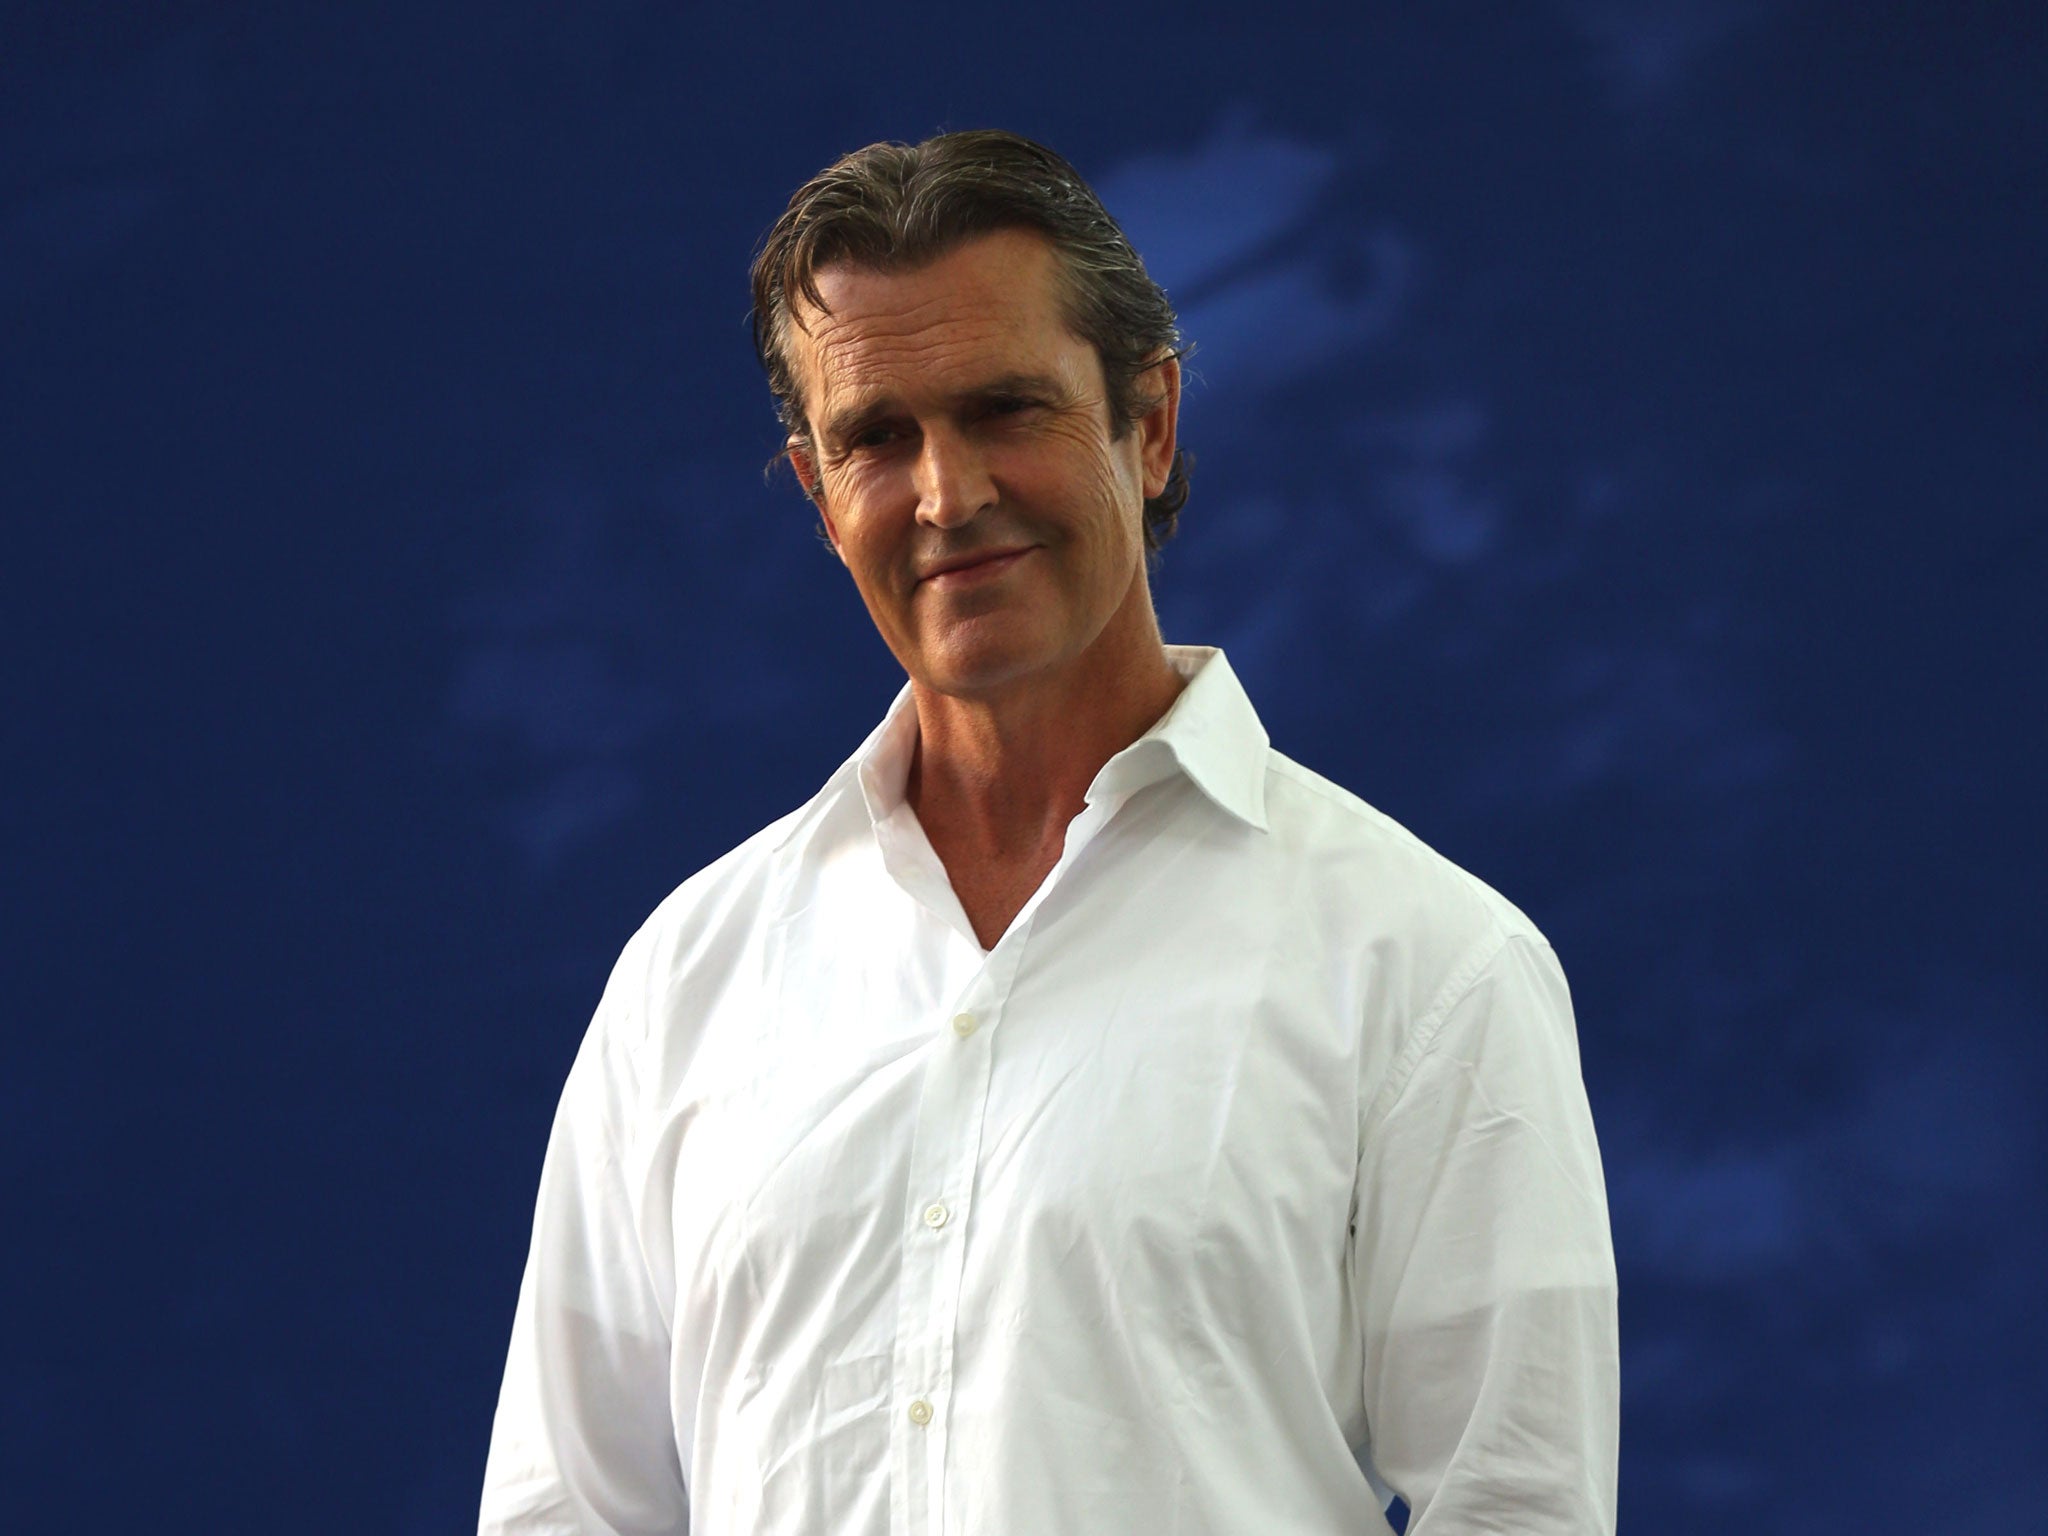 Rupert Everett has joined the campaign calling for a boycott of the Sochi Winter Olympics